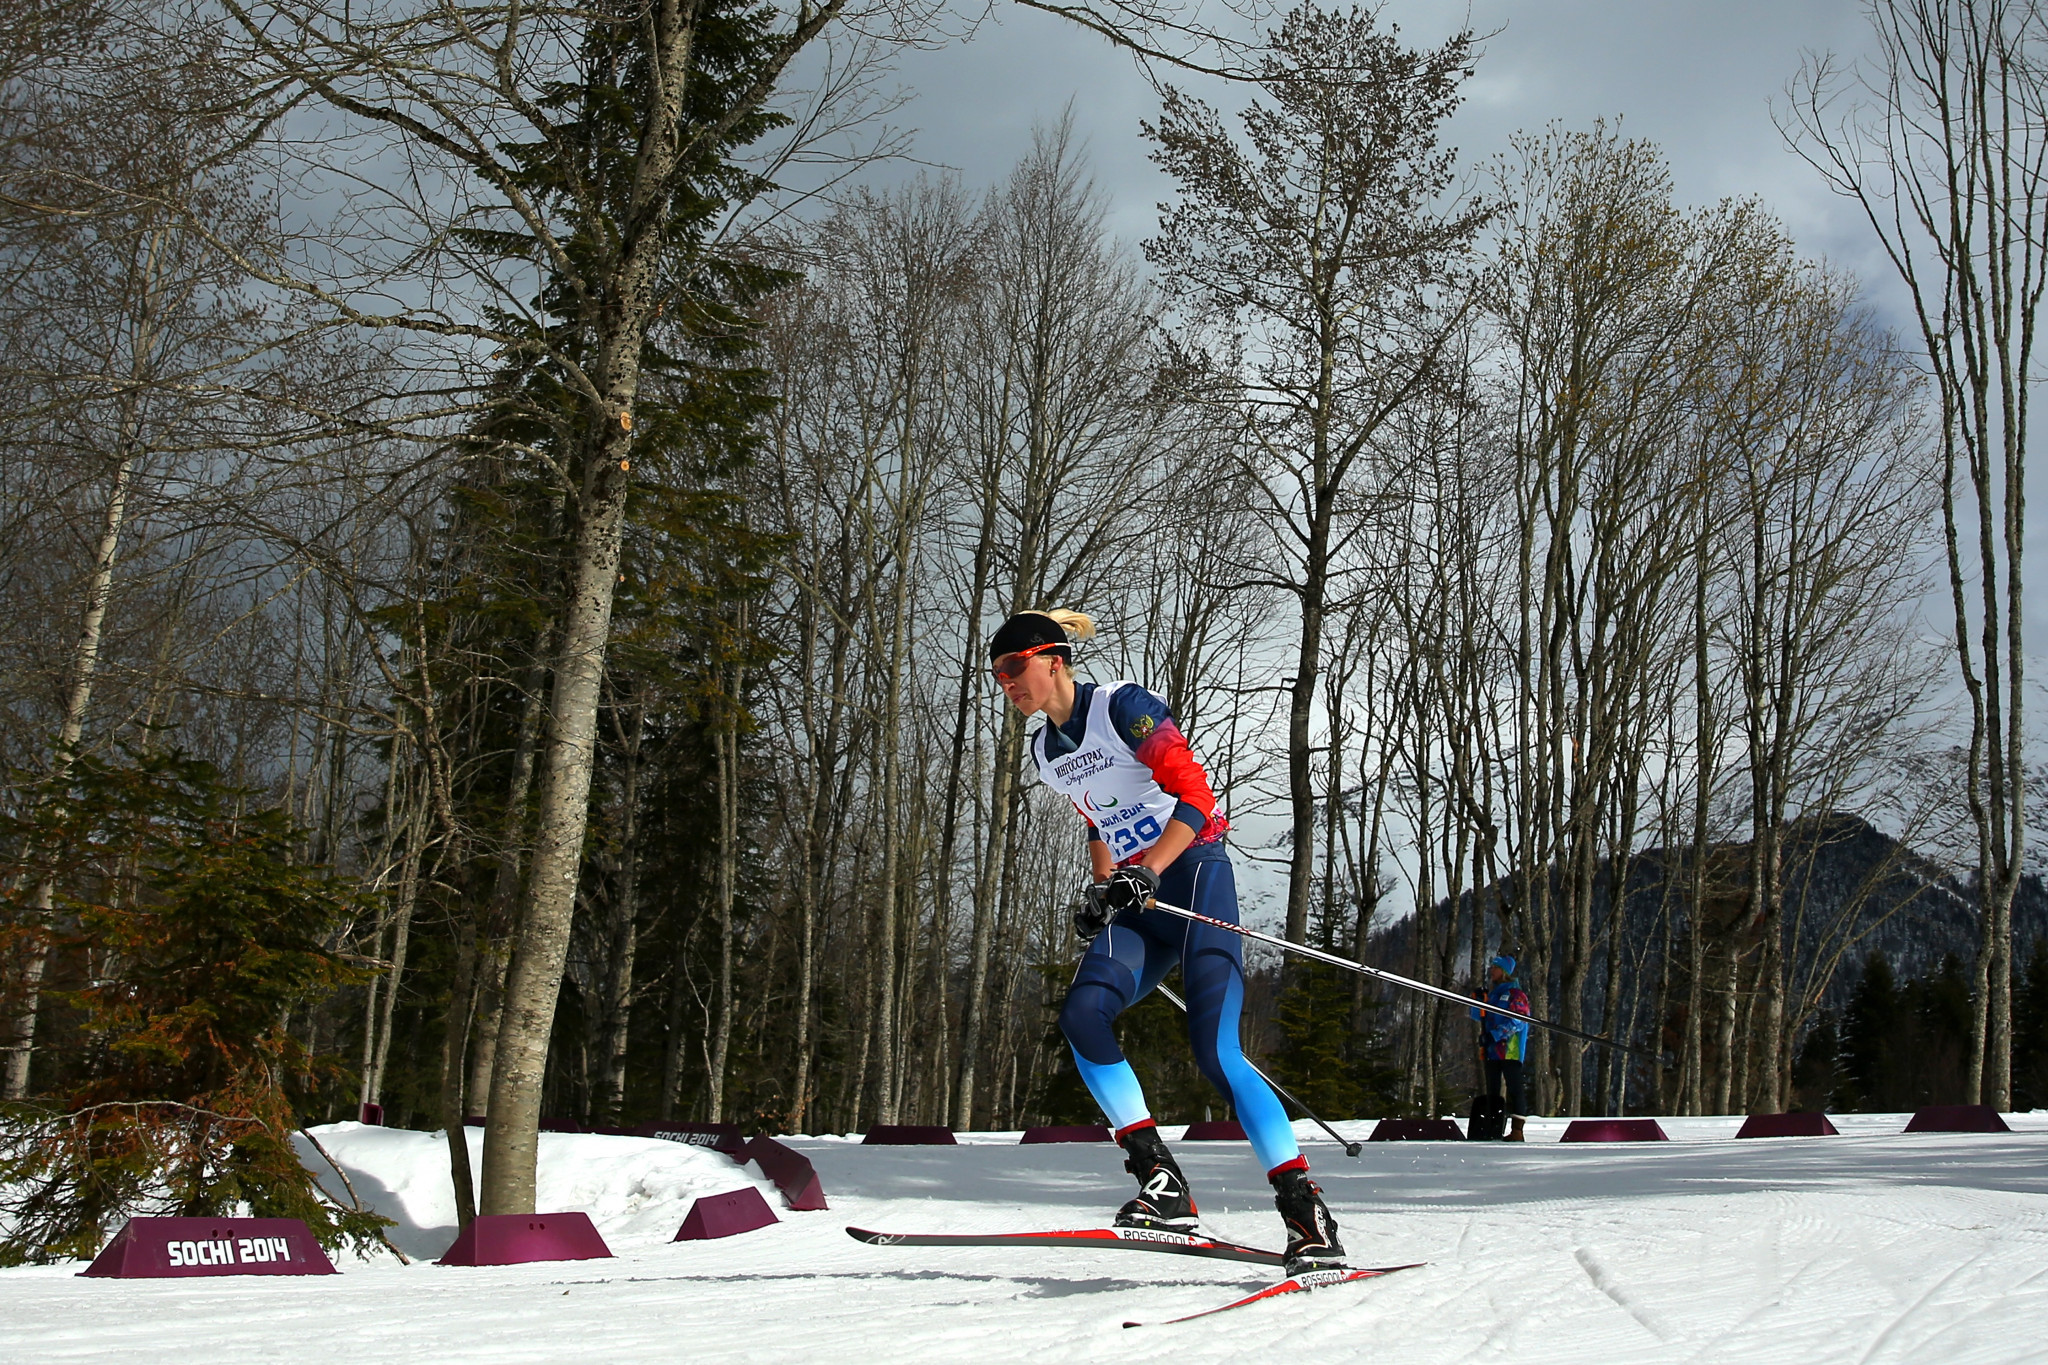 Russians competing as neutrals dominate biathlon races at Para Nordic Skiing World Cup